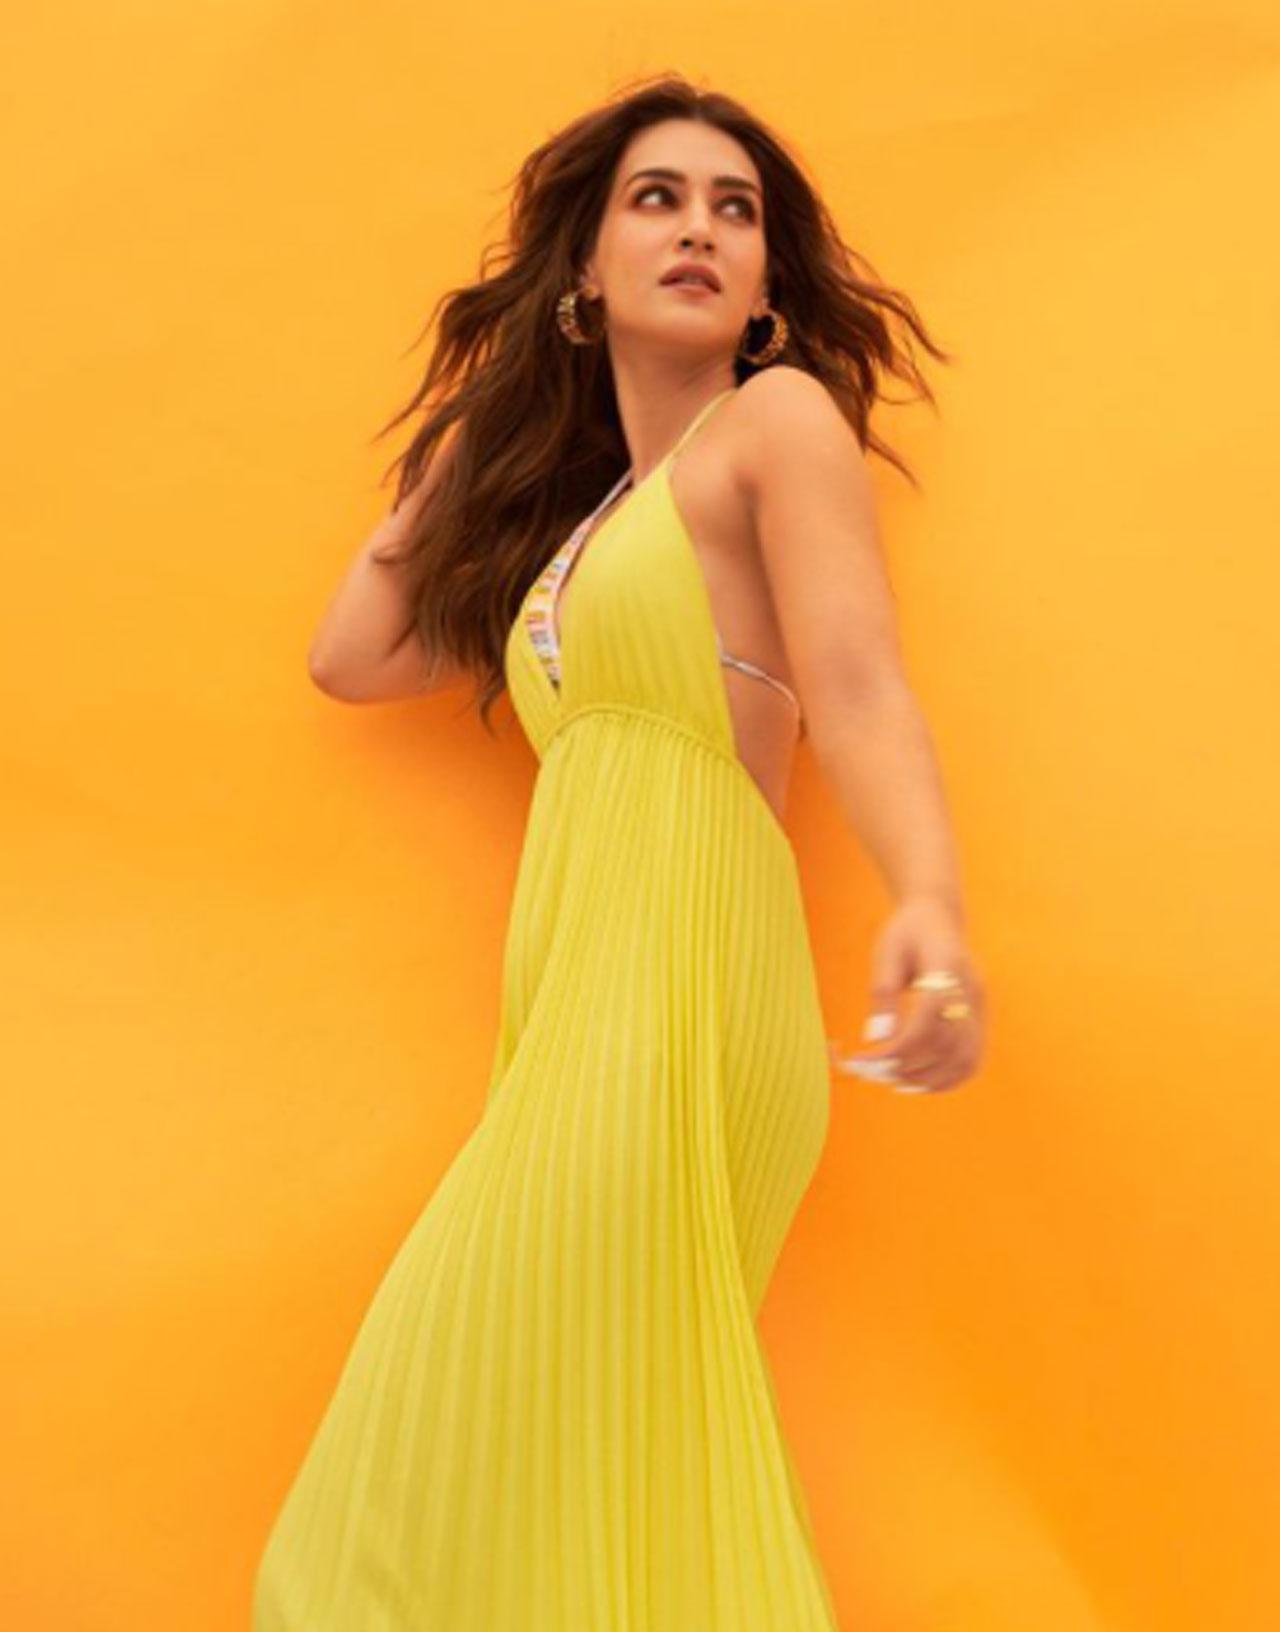 In one of the pictures, the actress sported a micro-pleated sunshine yellow jumpsuit featuring a plunging V halter neckline. She left her centre-parted hair open and accessorised up with golden earrings and rings.